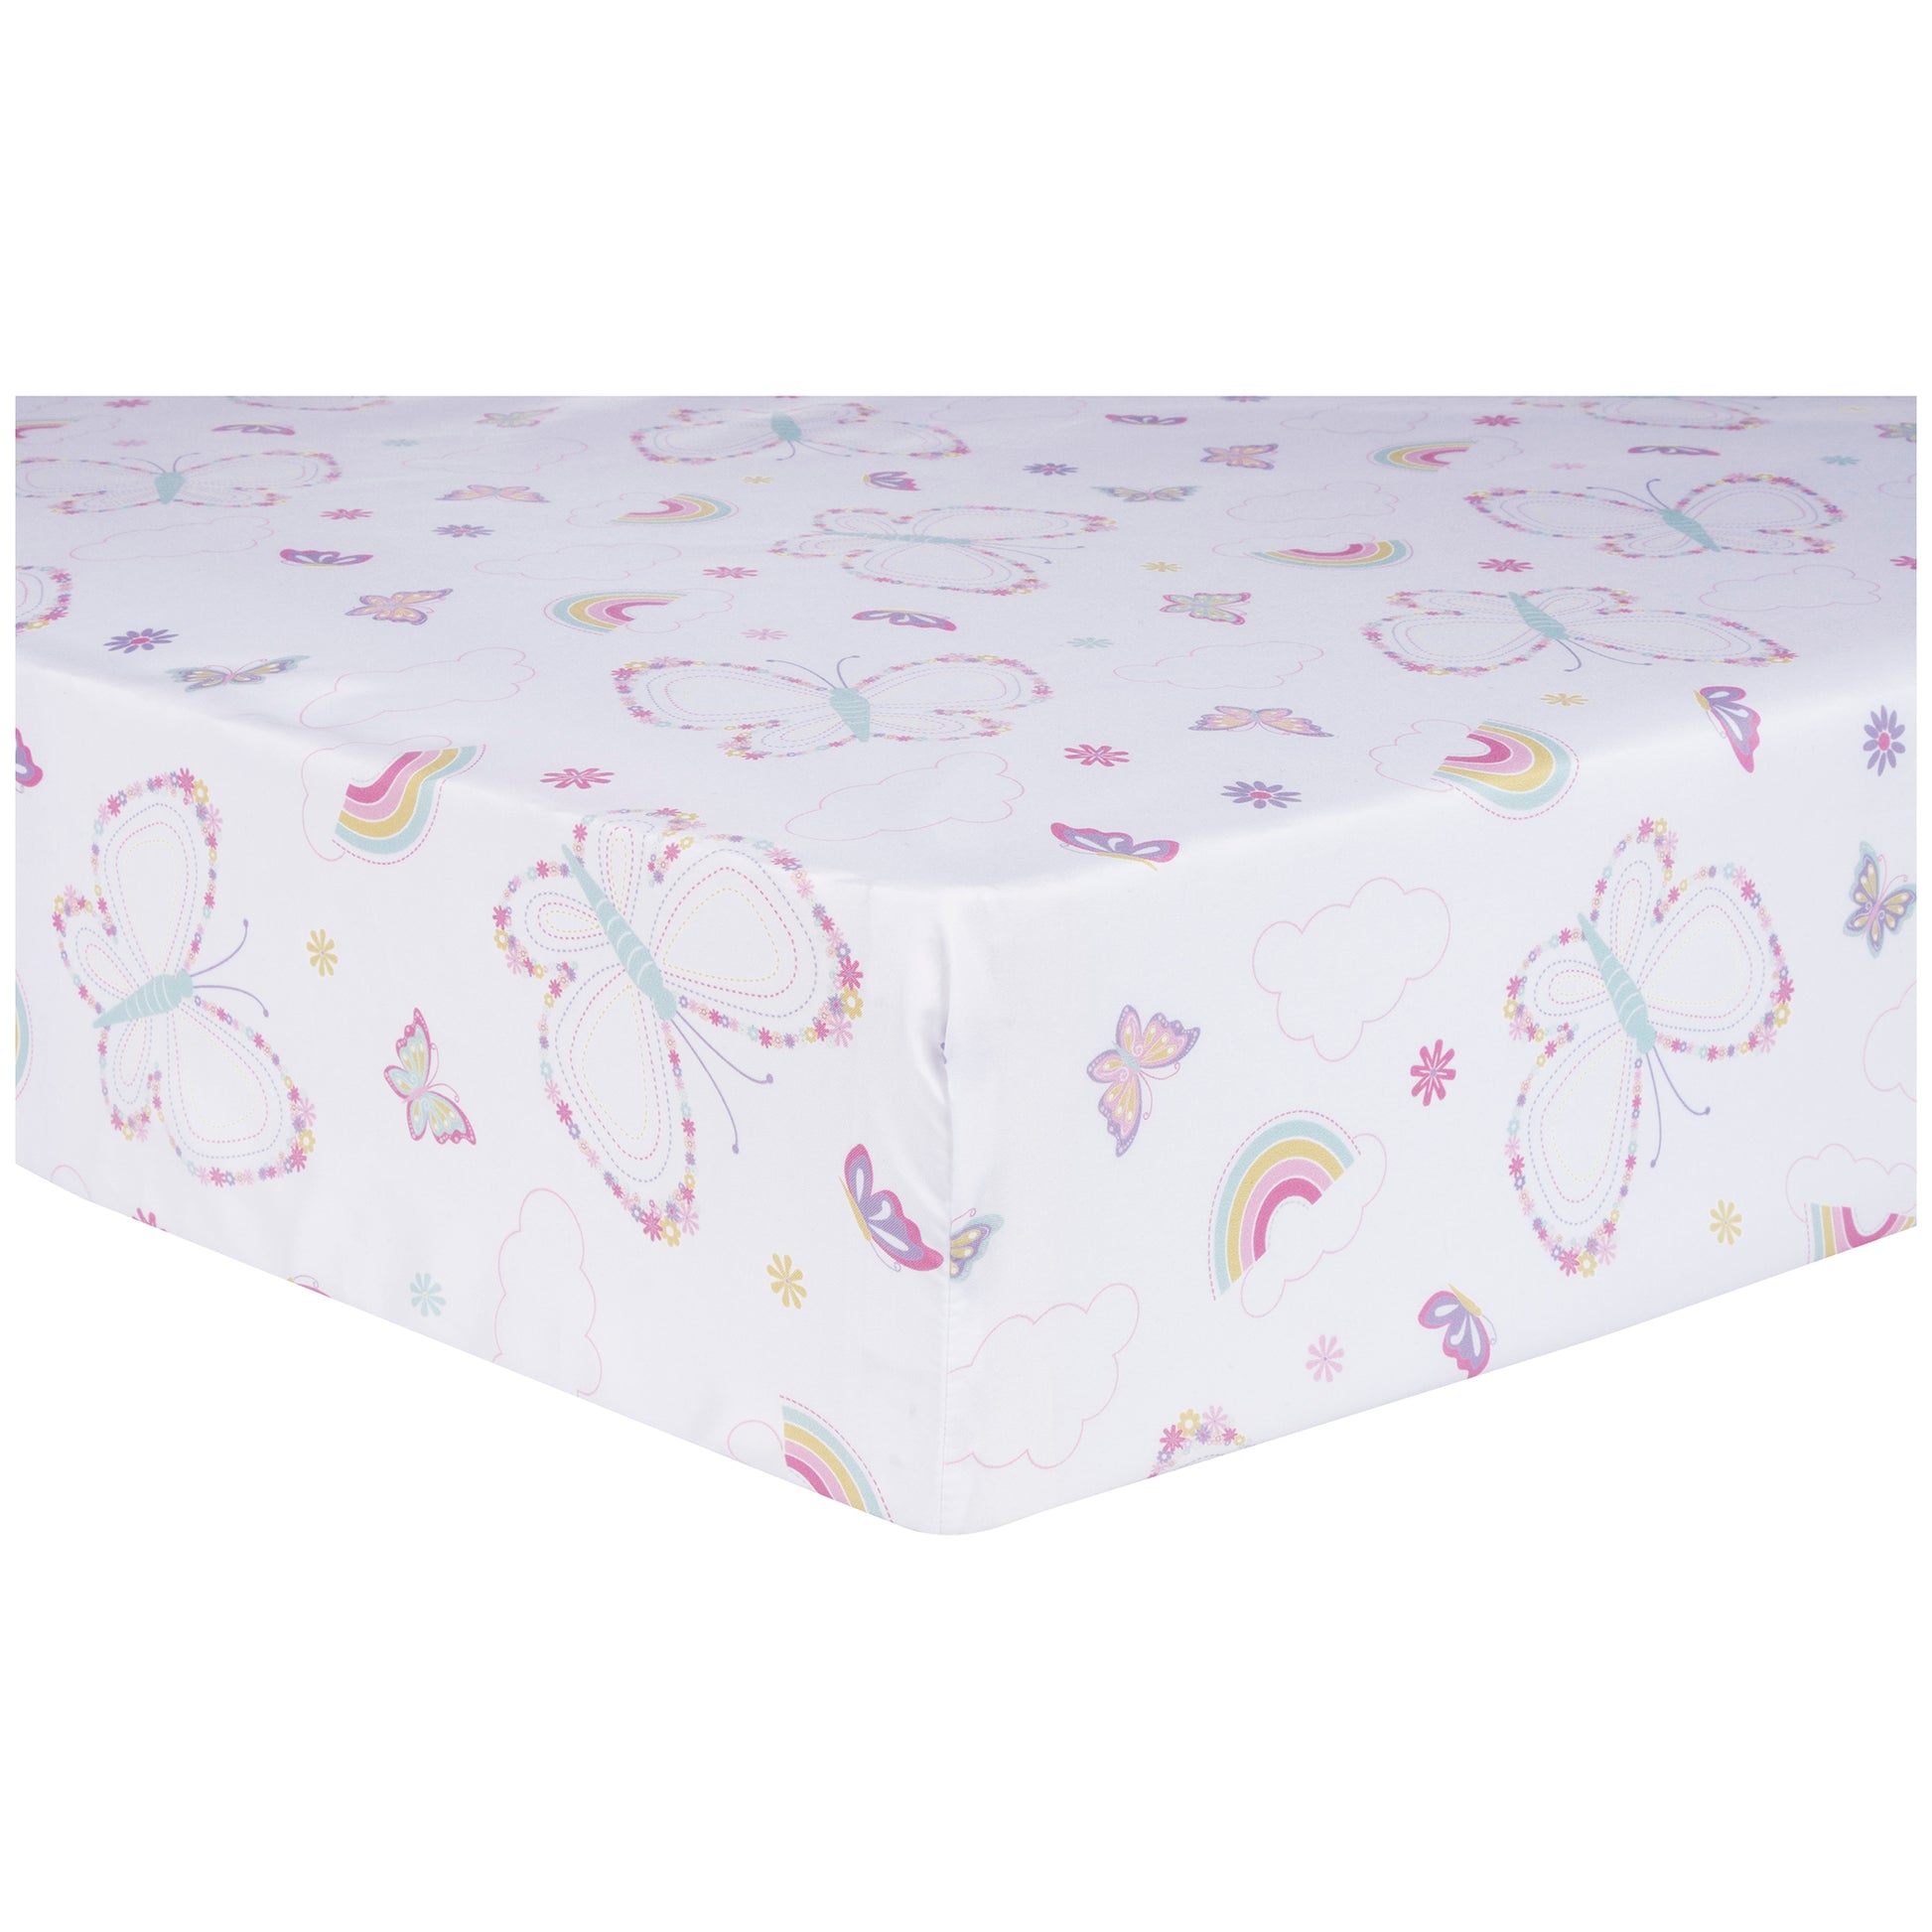  Floral Butterfly 4 Piece Crib Bedding Set; corner view, crib sheet features a scattered print of floral butterflies, clouds, flowers, and rainbows in pink, light yellow, cool blue and orchid.